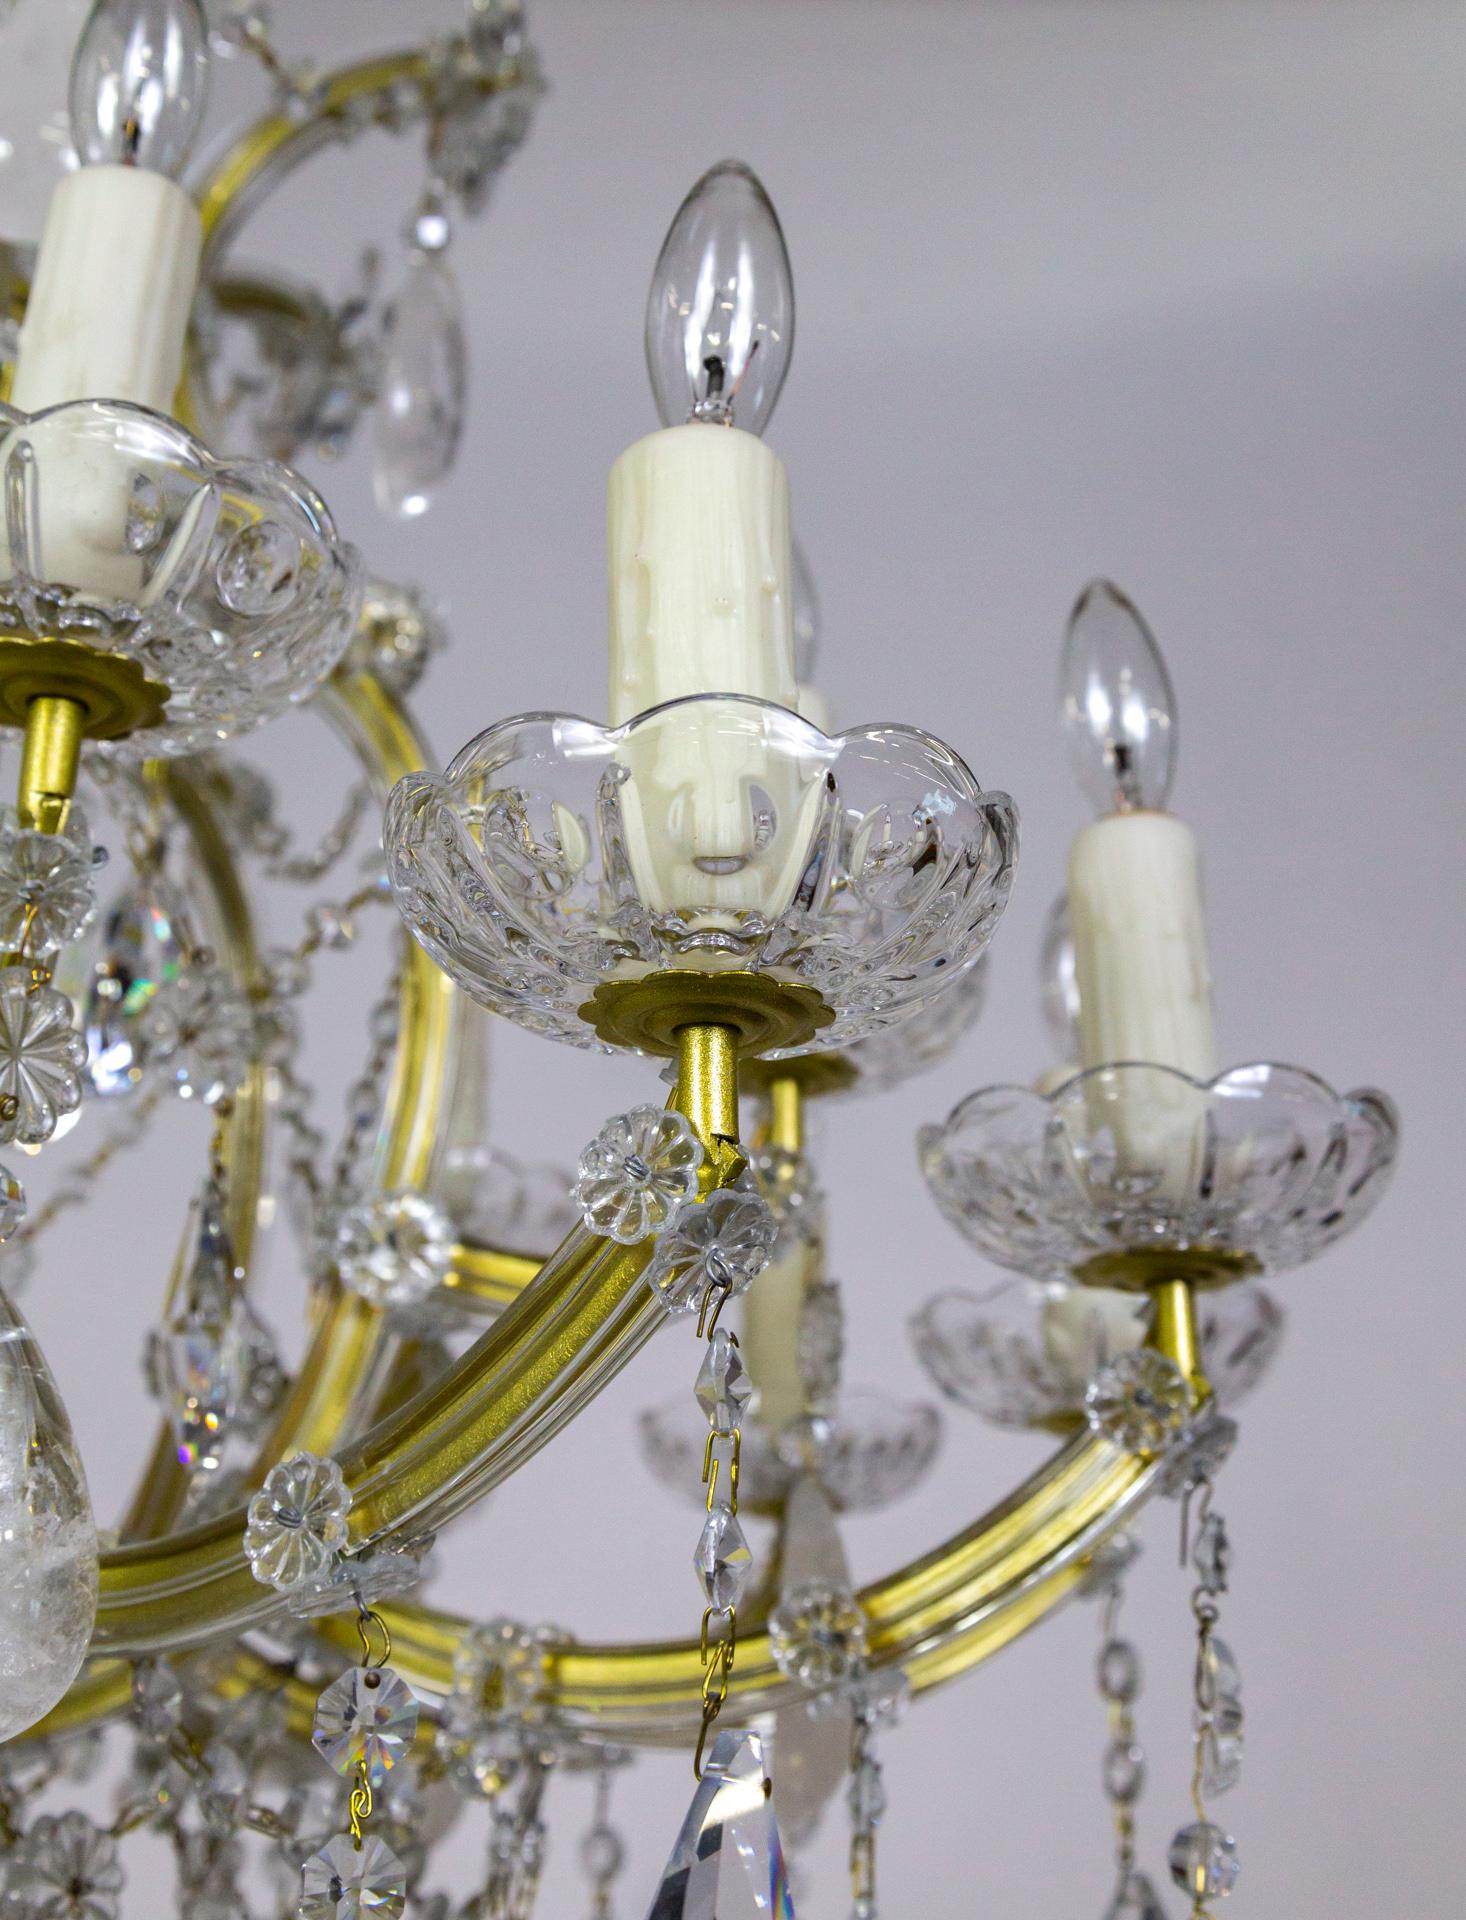 19-Light Rock Crystal Maria Theresa Chandelier For Sale 8